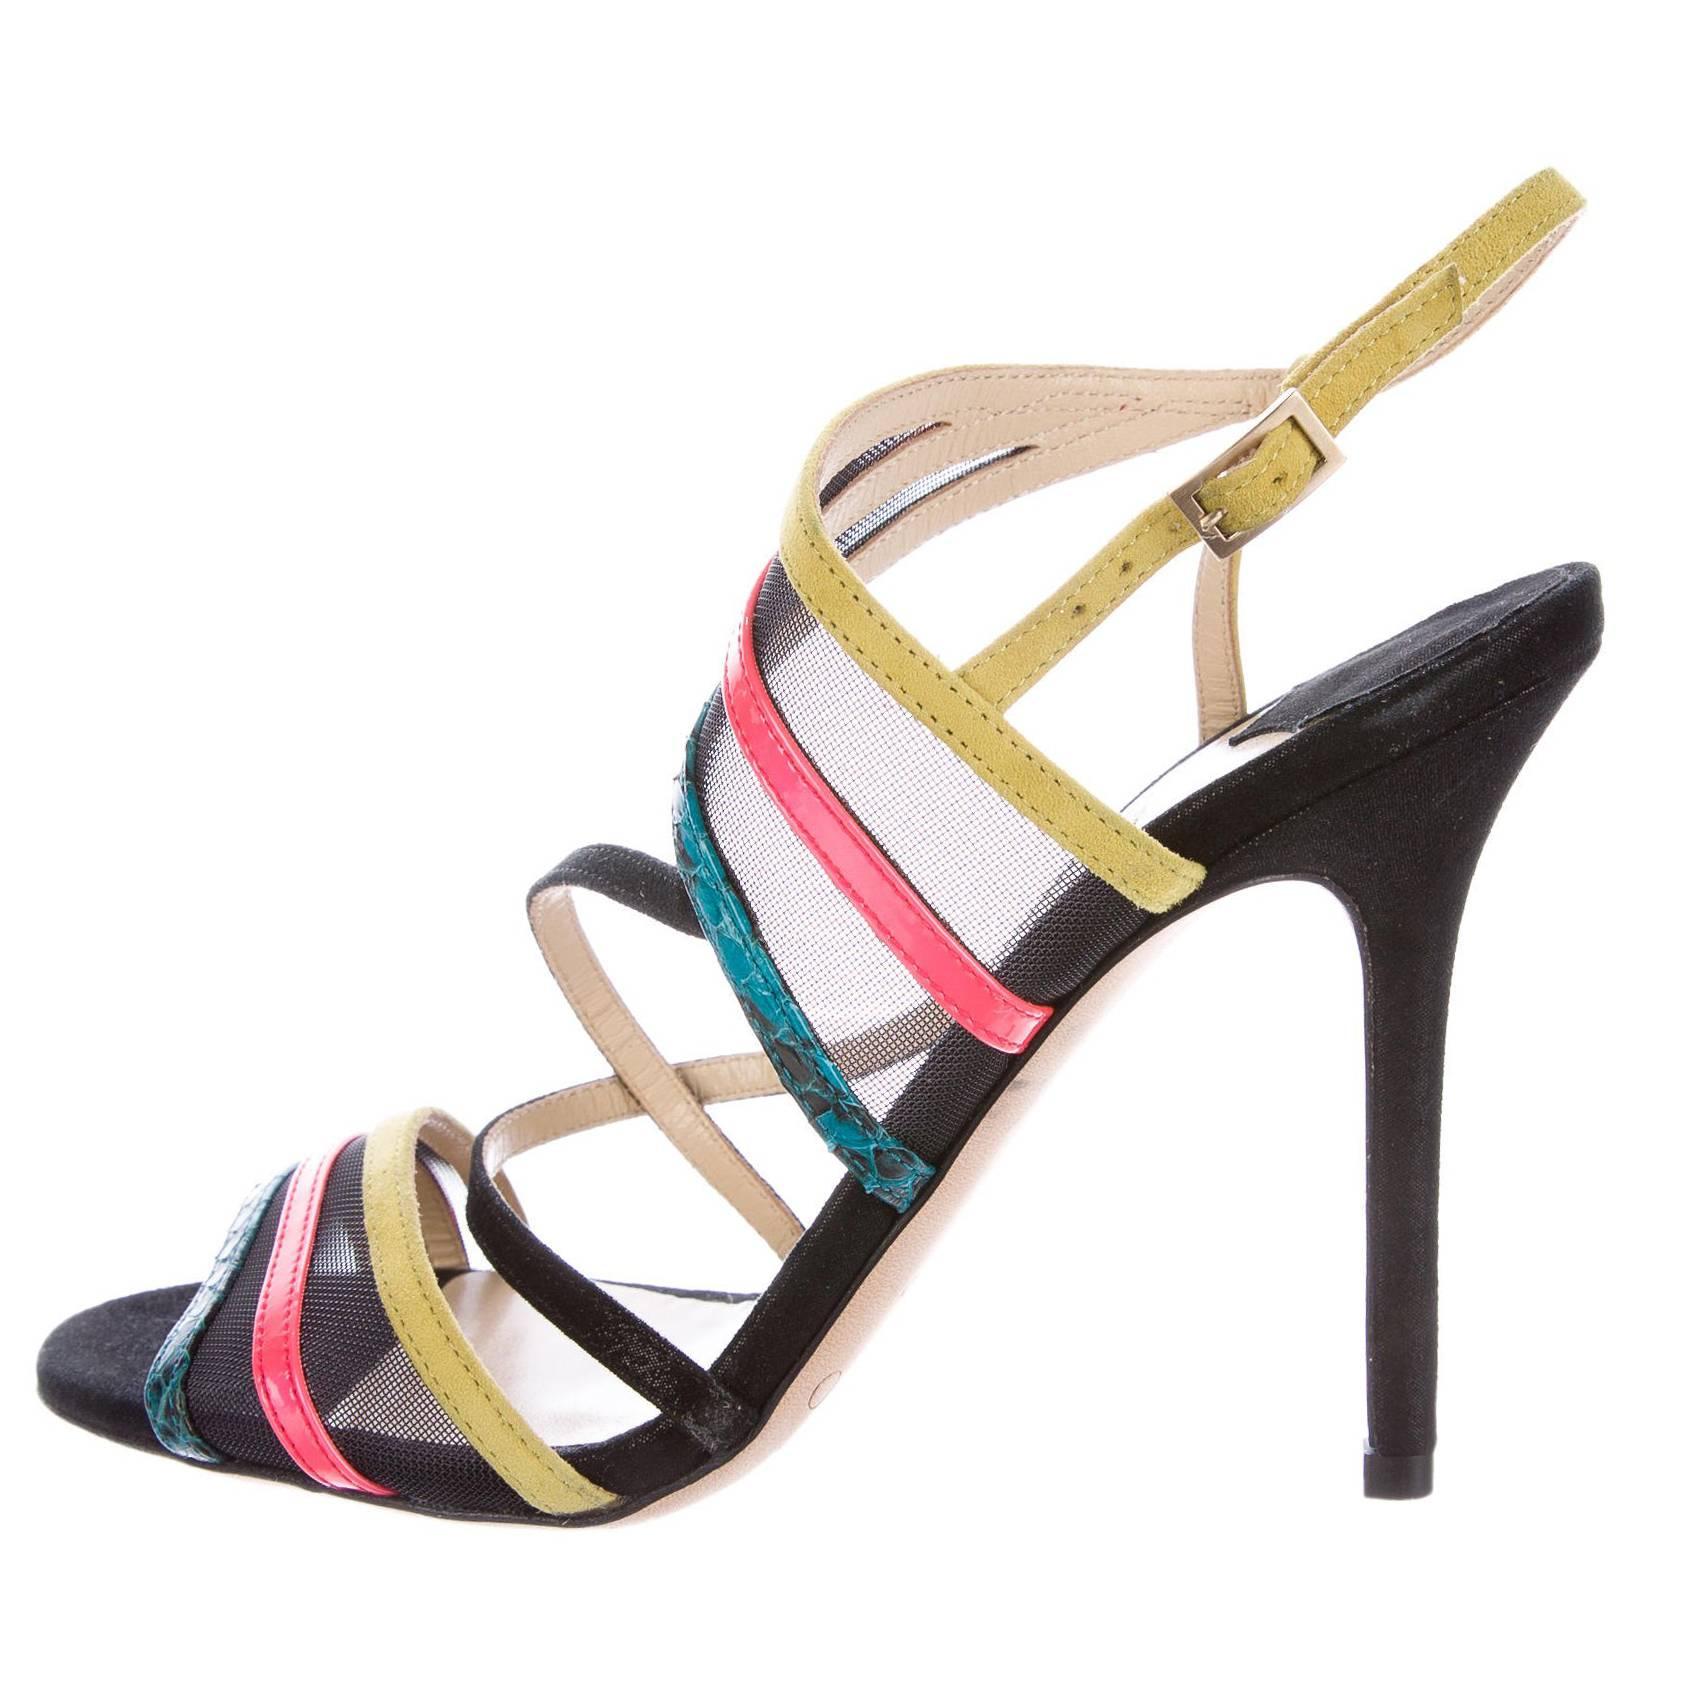 Jimmy Choo NEW Multi Color Mesh Suede Evening Sandals Heels Shoes 